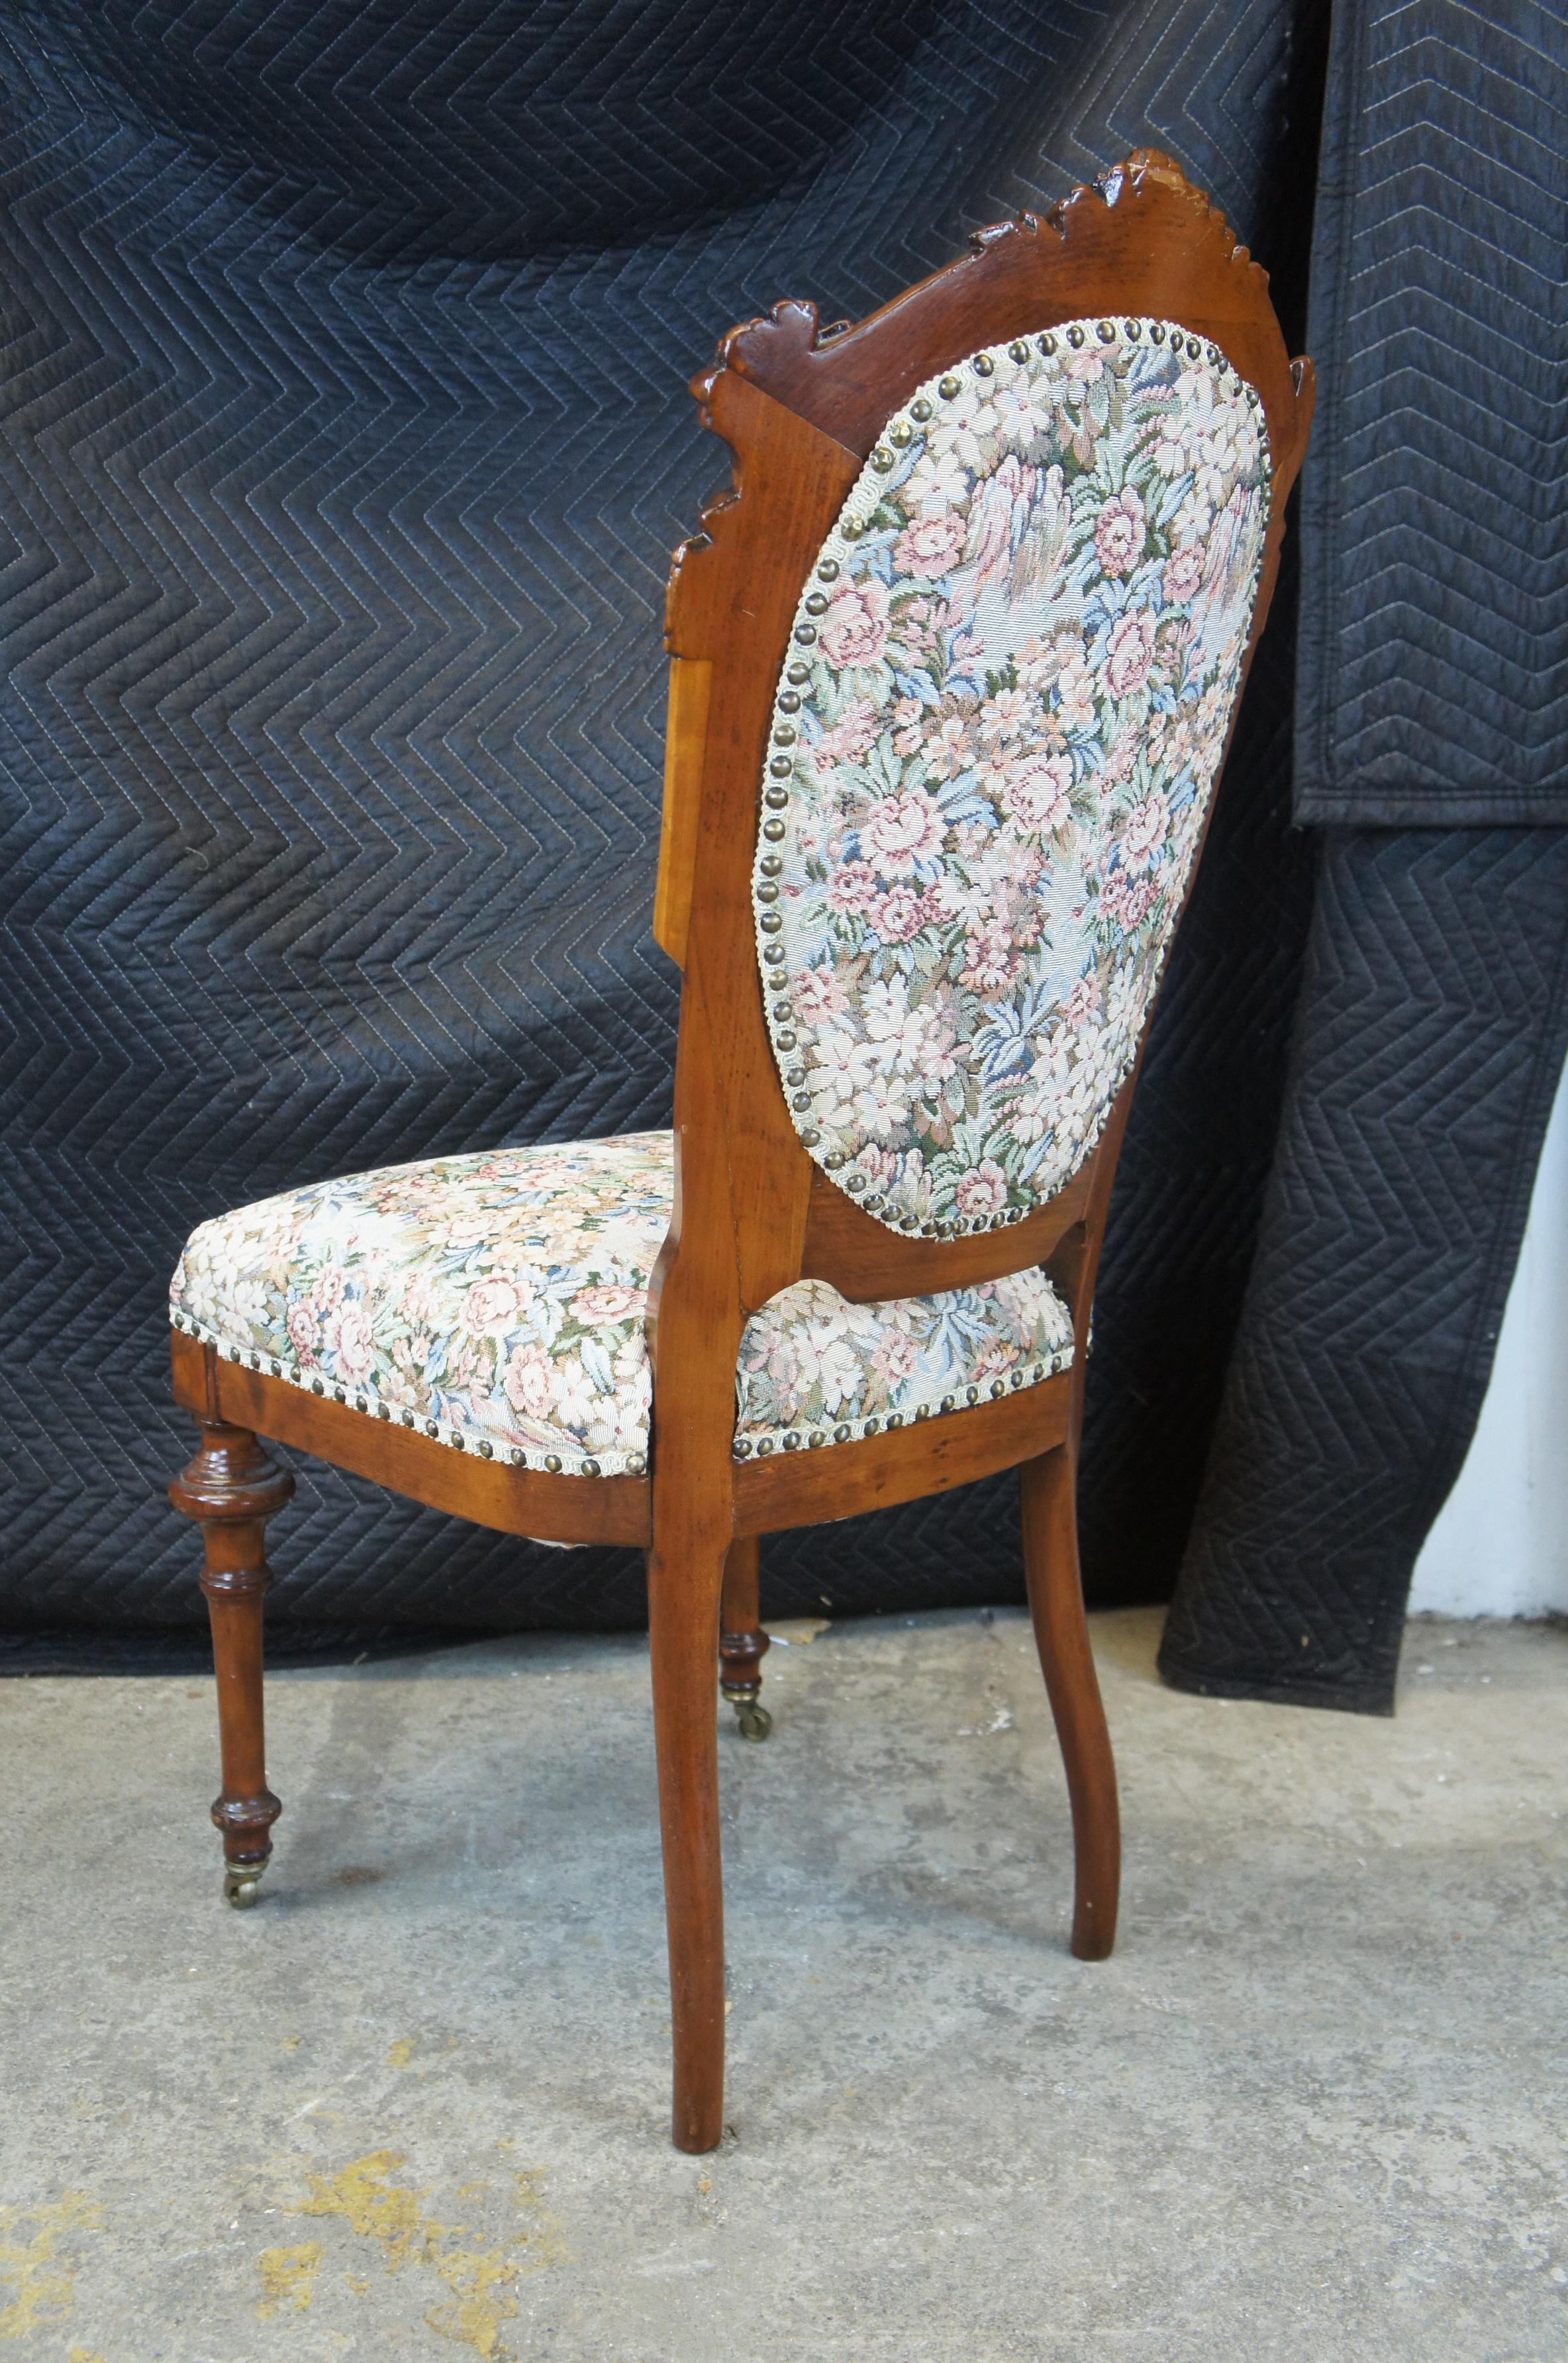 Embroidered Antique Victorian Renaissance Revival Walnut Needlepoint Parlor Dining Chair